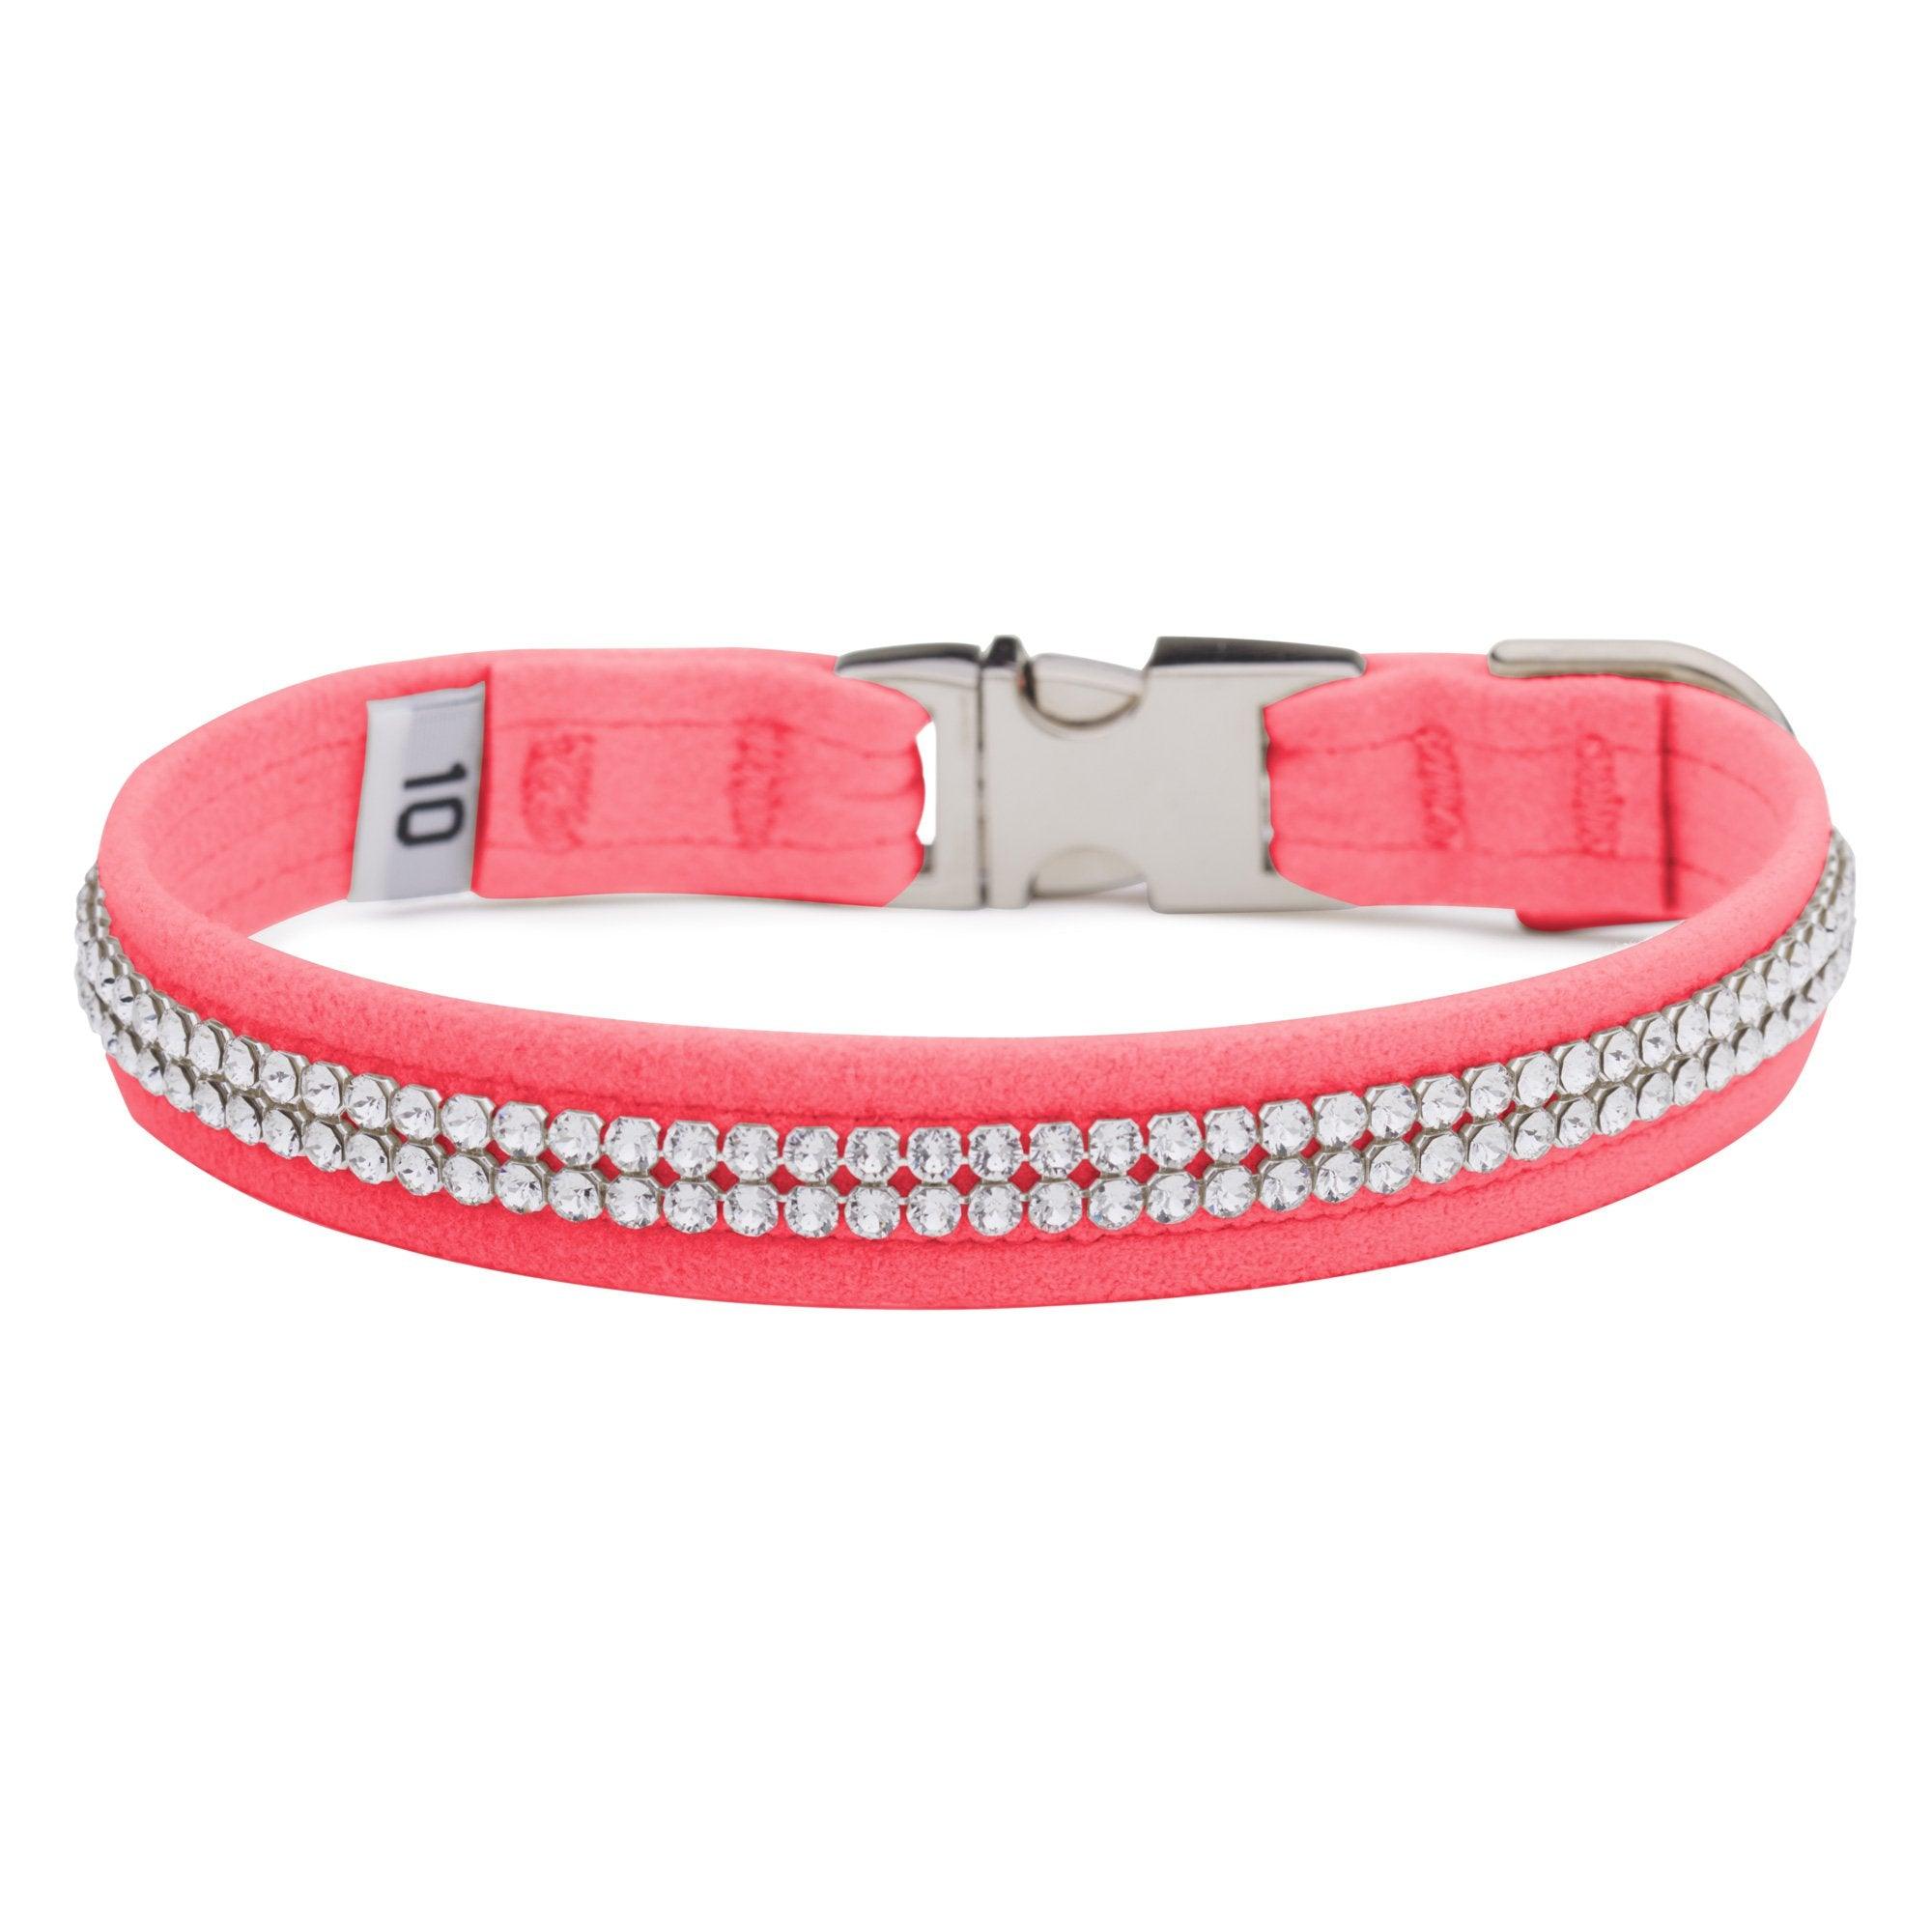 Perfect Pink 2 Row Giltmore Perfect Fit Collar - Rocky & Maggie's Pet Boutique and Salon